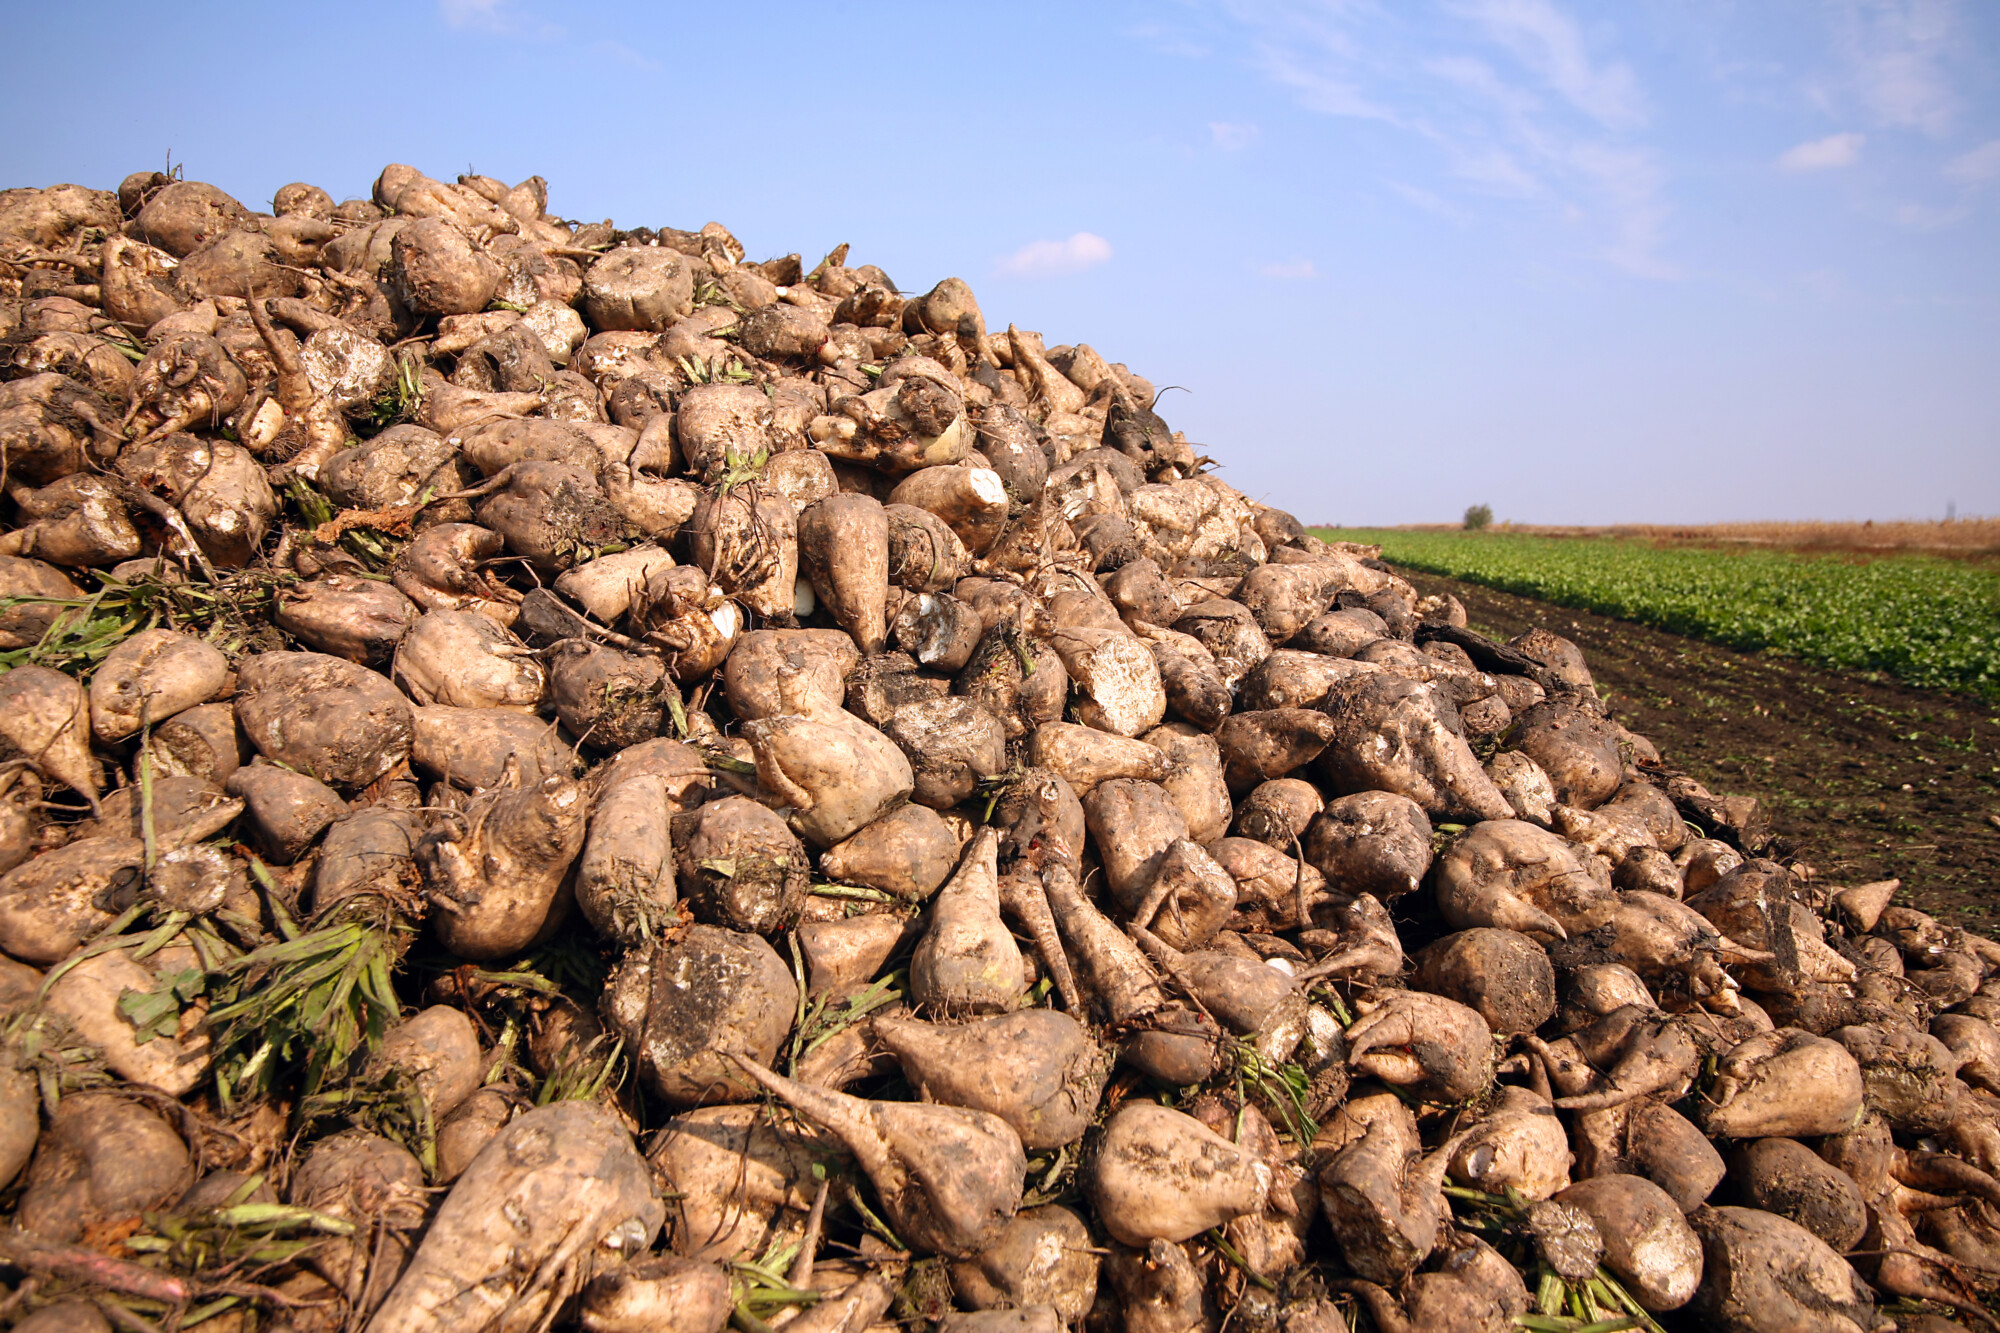 Sugar beet contract agreed for 2022